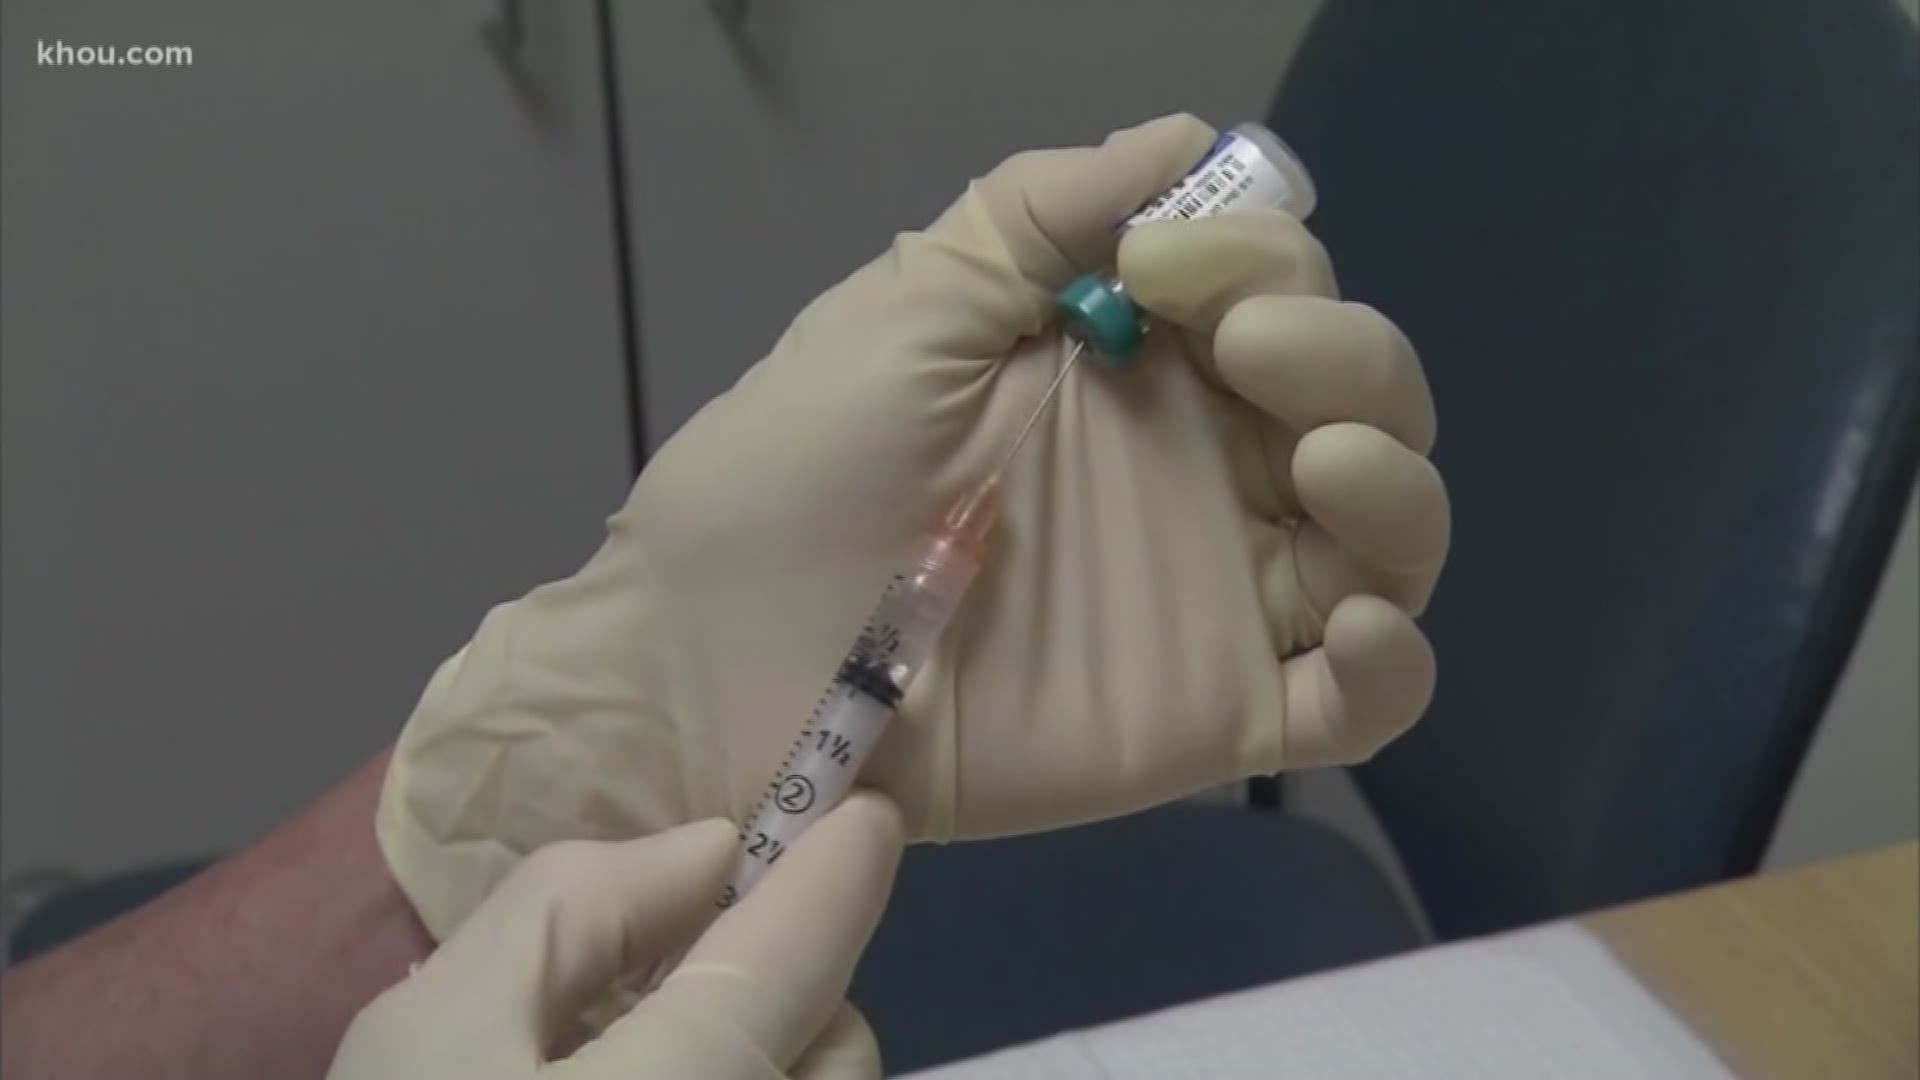 Health officials are investigating a possible mumps outbreak at the Harris County Jail after several inmates are showing symptoms of the virus. Test results are expected Wednesday.